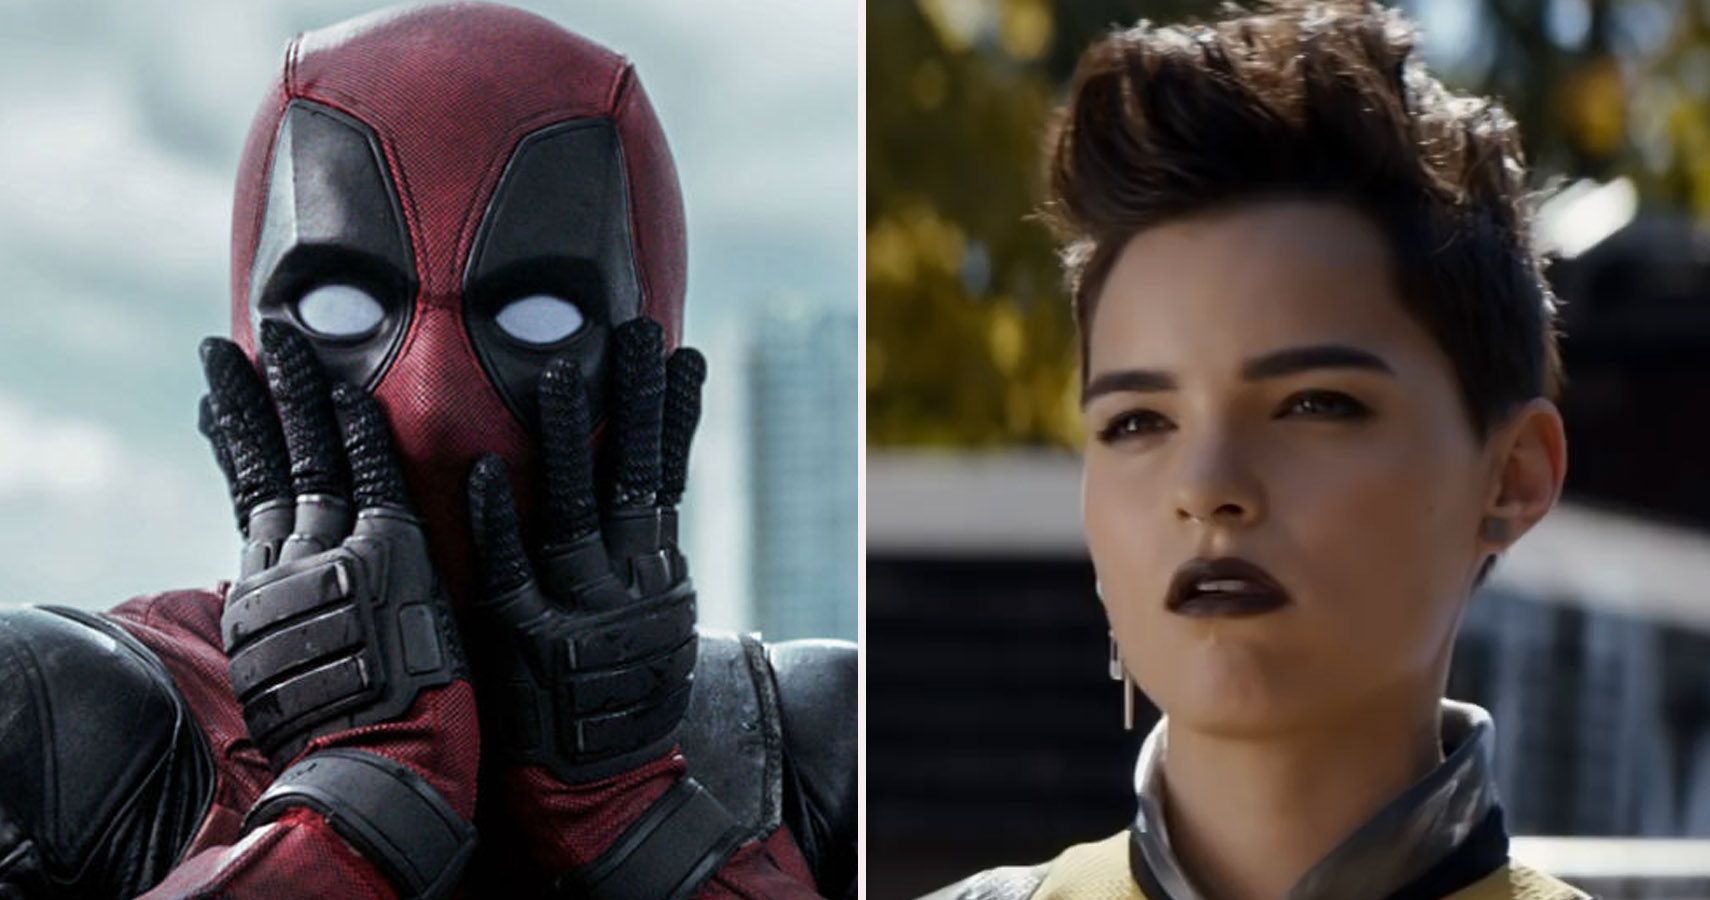 The Cast of 'Deadpool 2' in Real Life